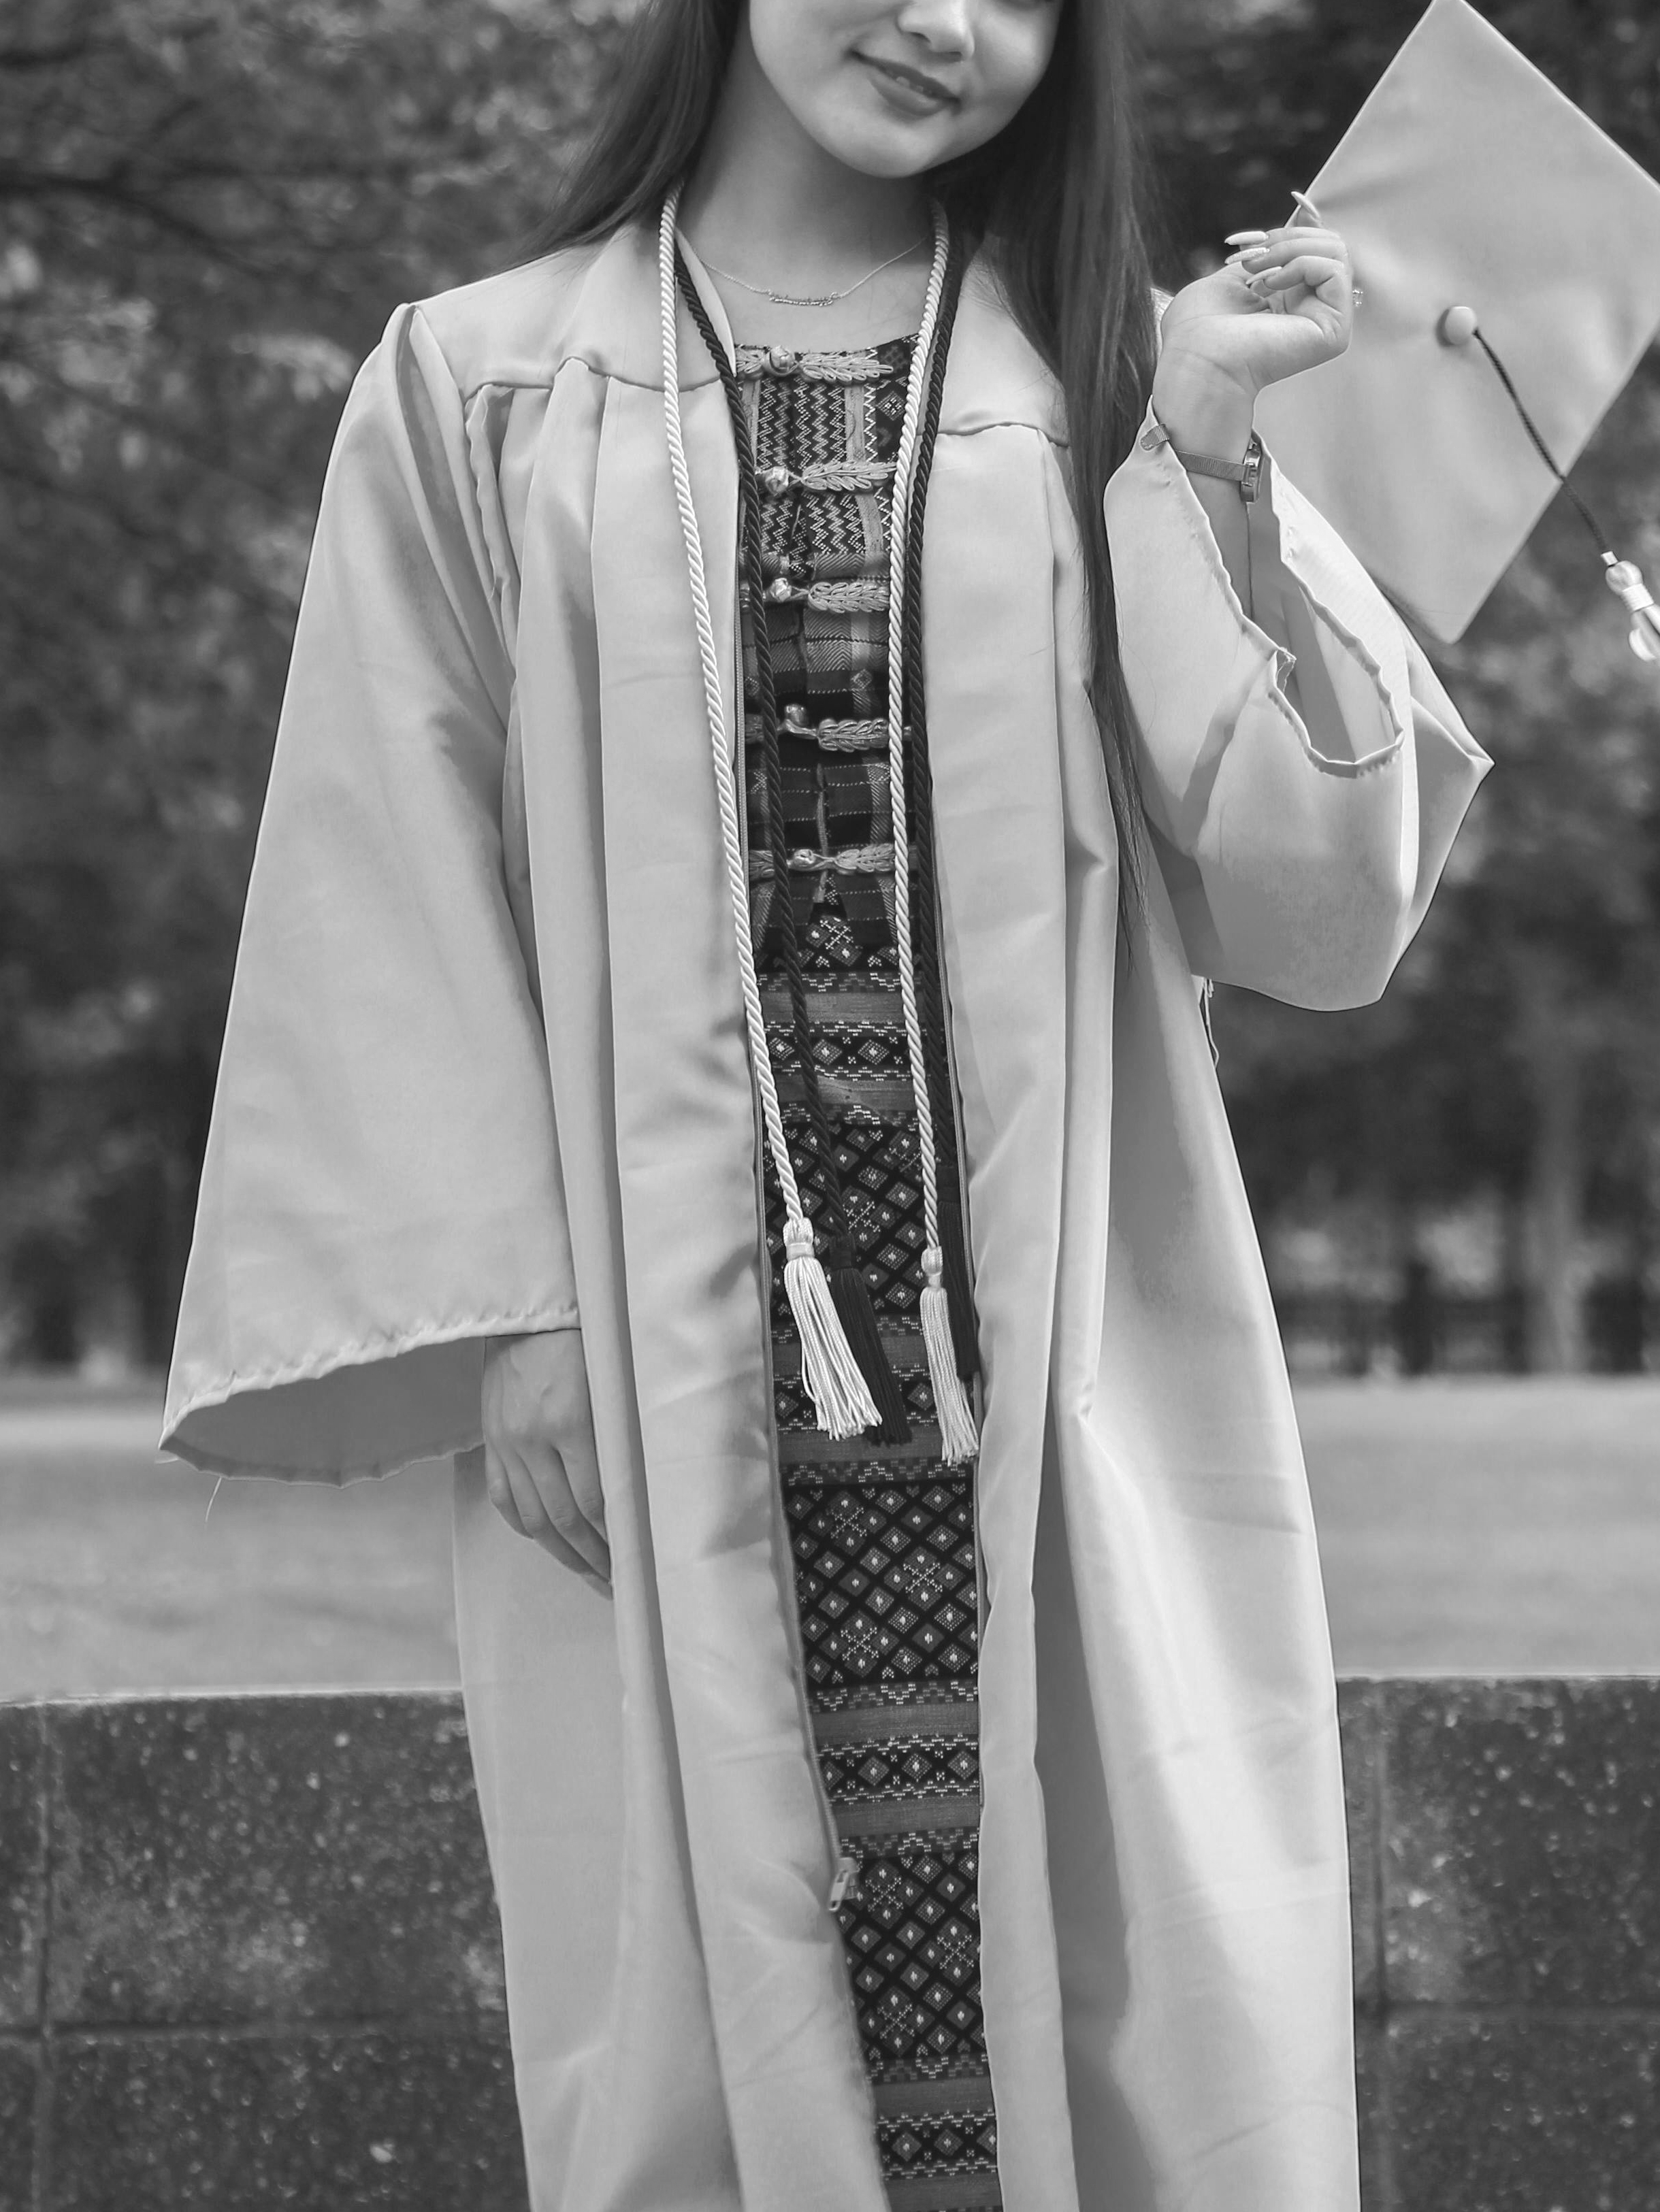 Julia alone on her graduation day | Source: Pexels